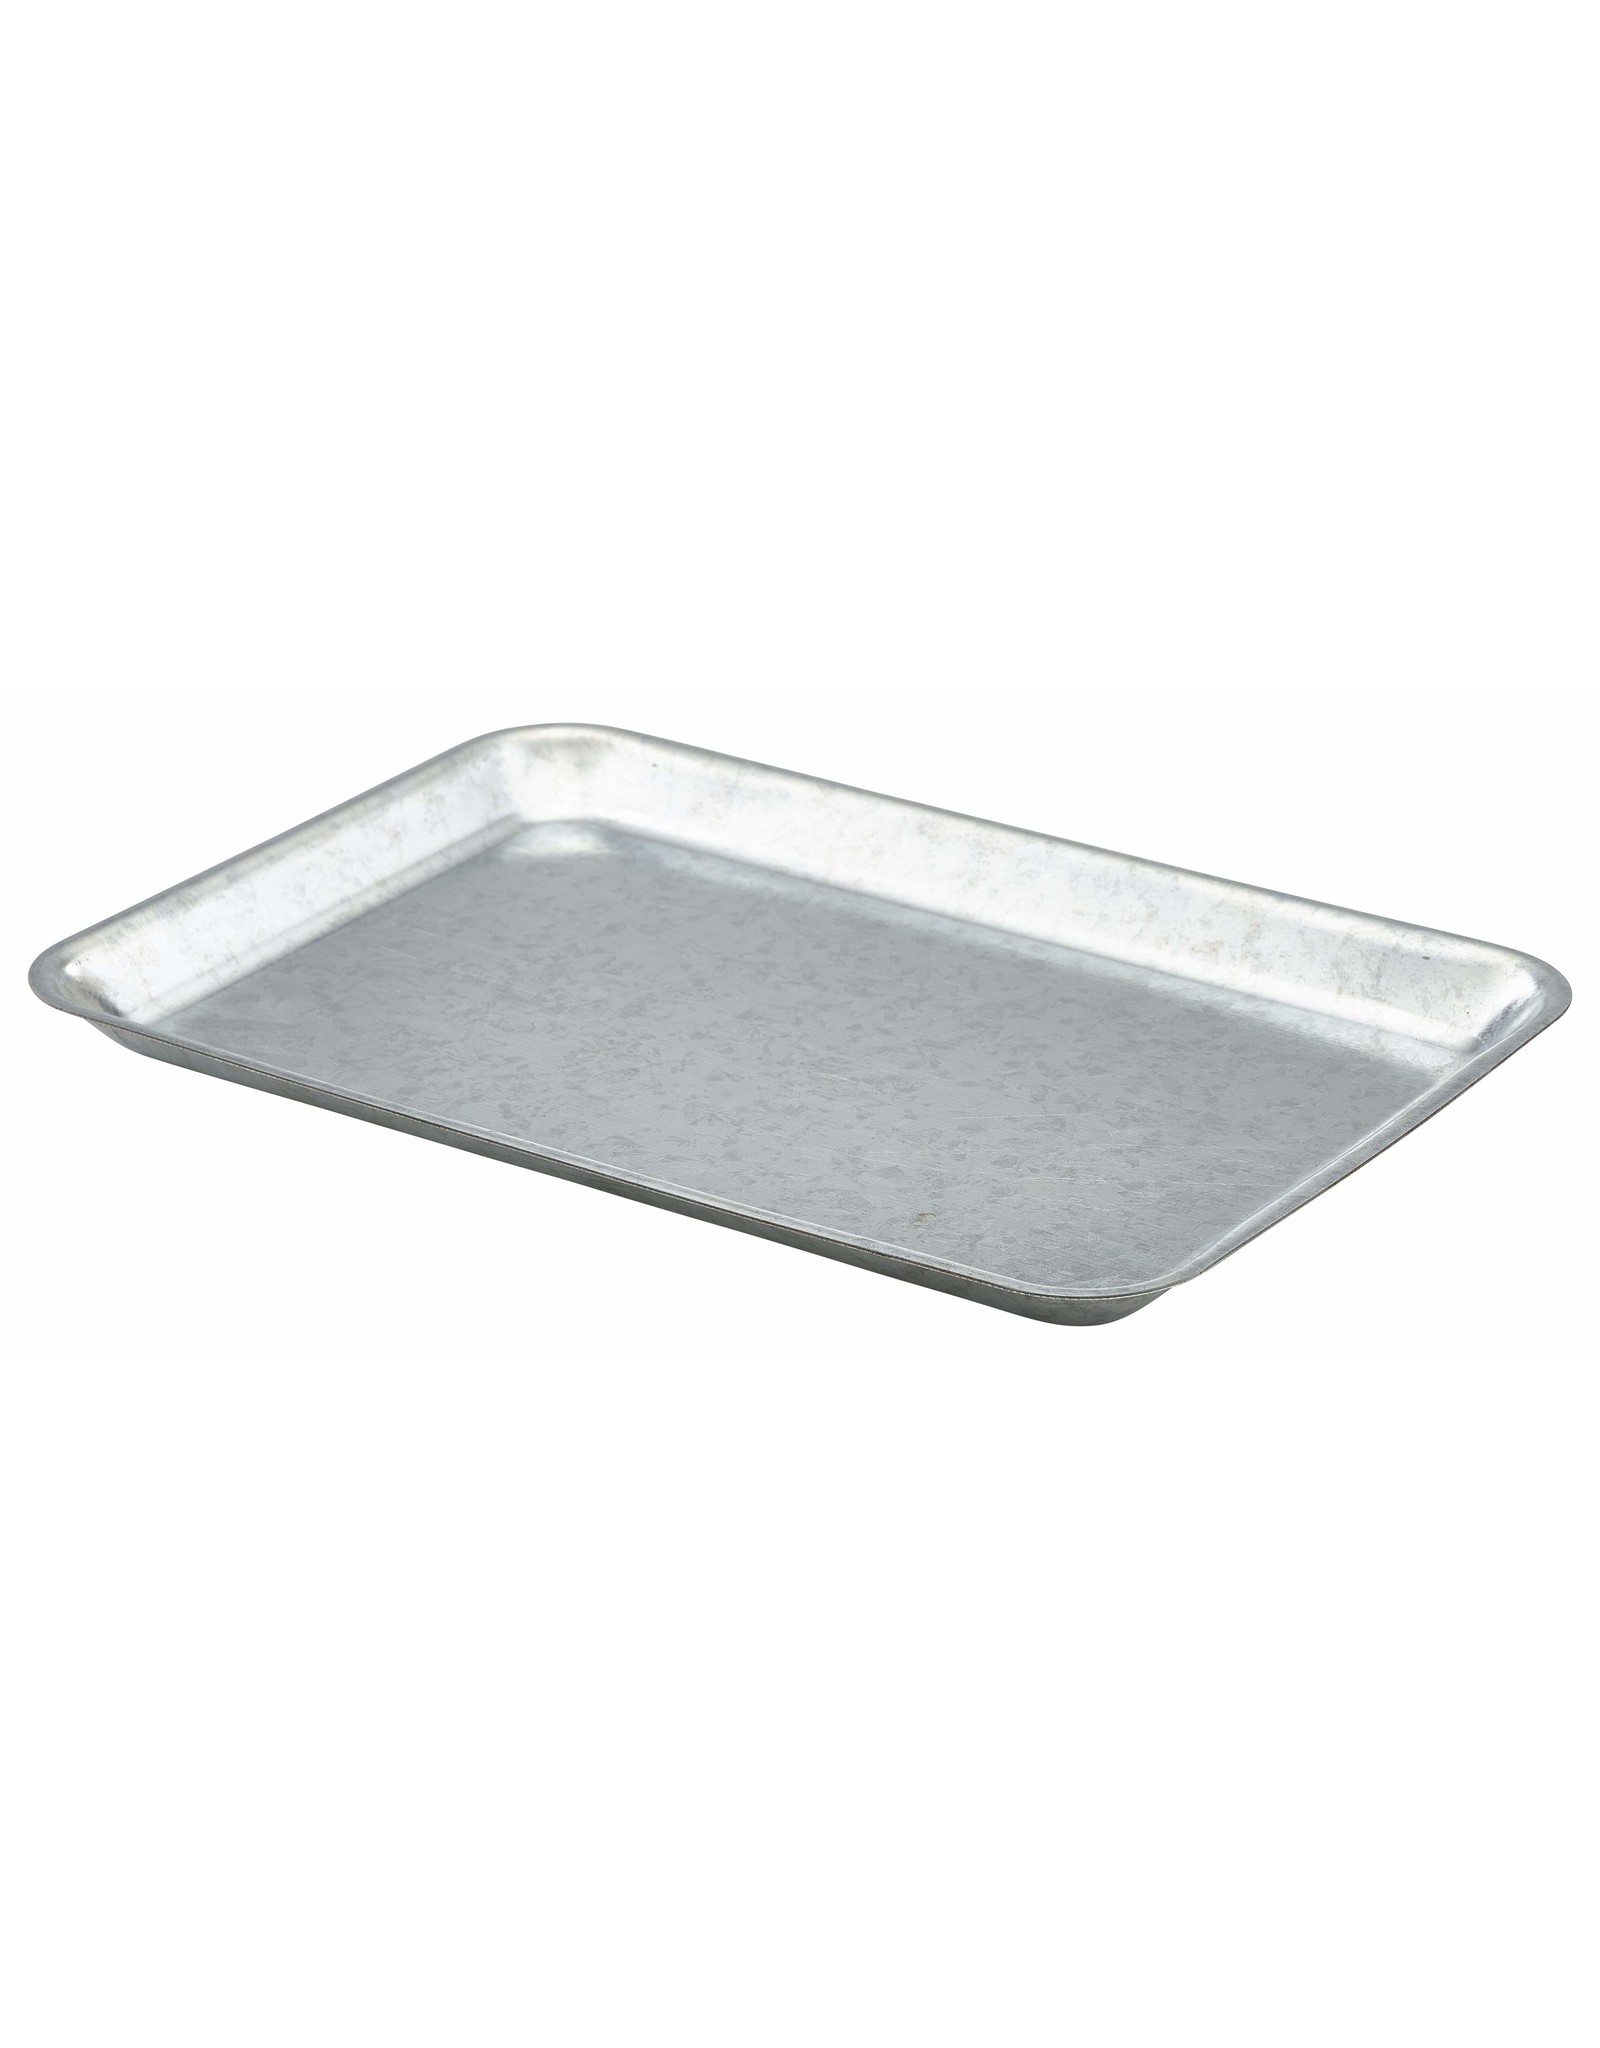 Stylepoint Galvanised steel Serving Dish rect. 31,5 x 21,5 cm